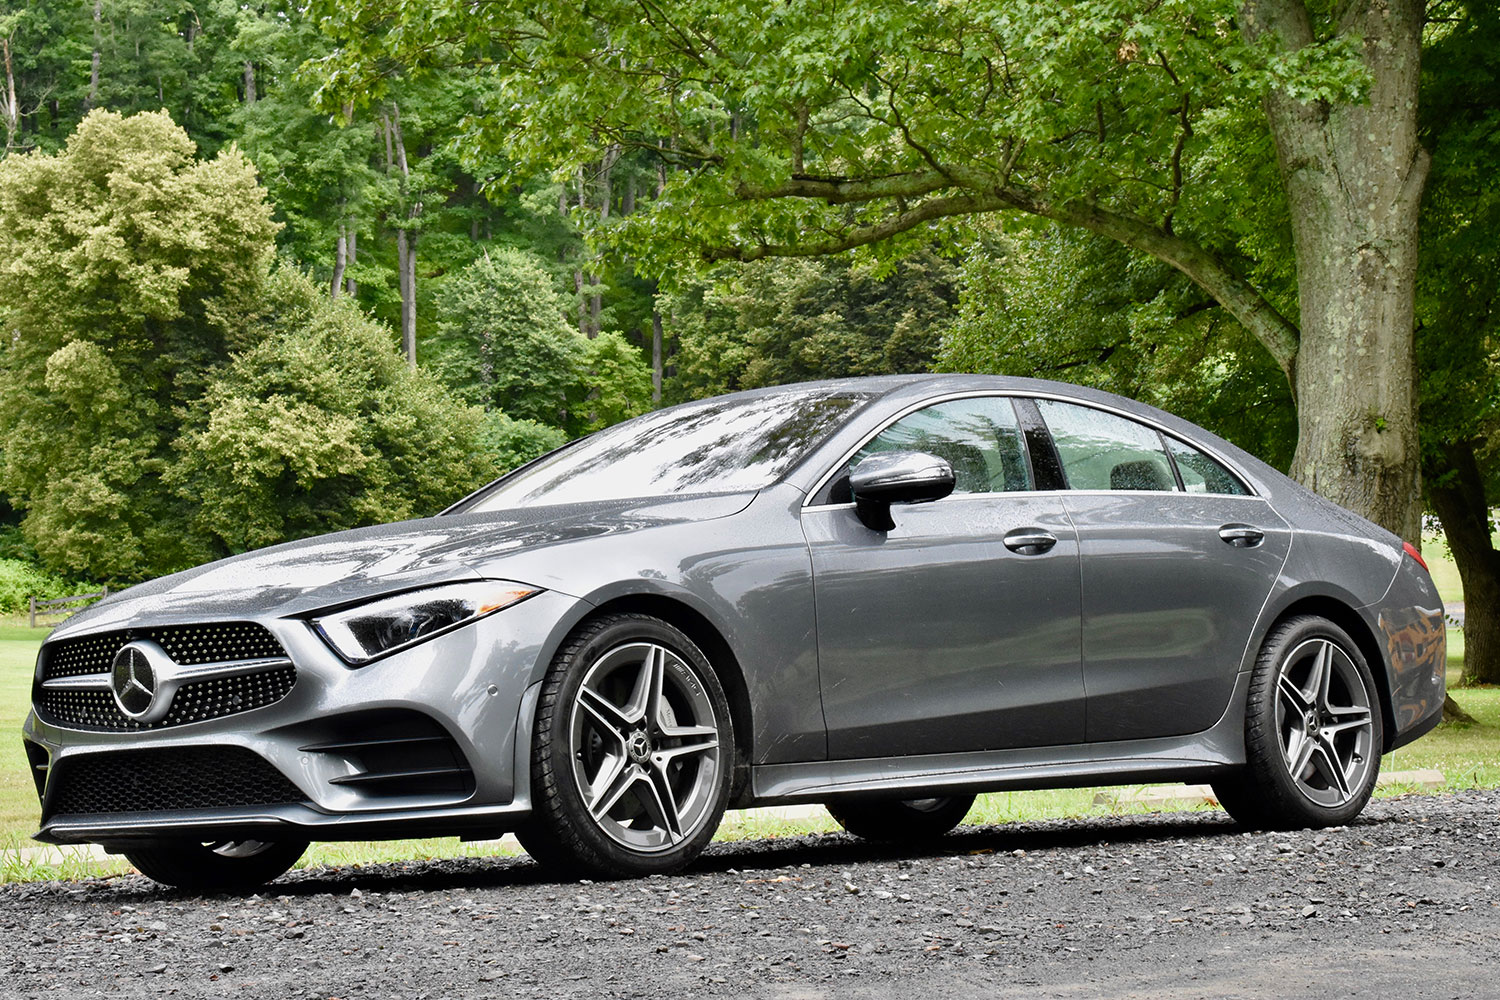 2019 Mercedes-Benz CLS450 4Matic First Drive Review | Digital Trends